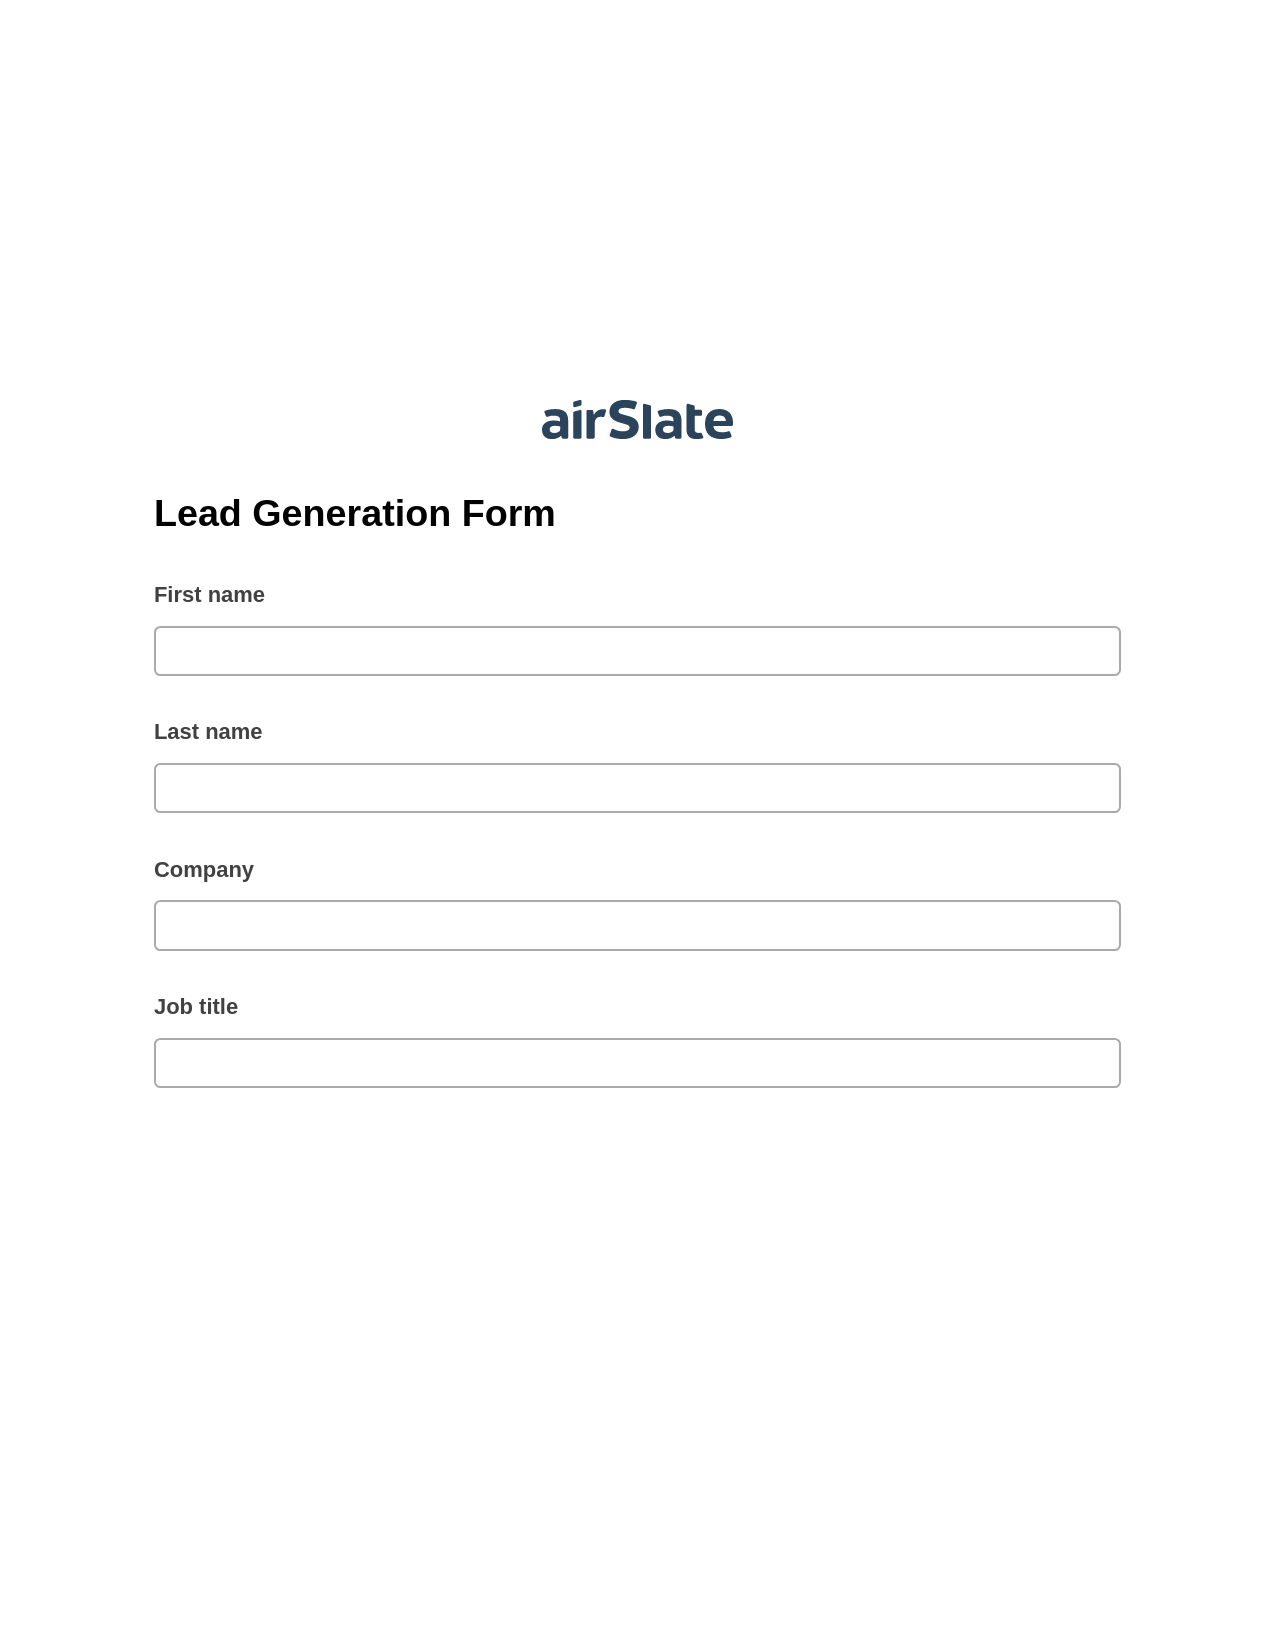 Lead Generation Form Pre-fill from MySQL Bot, Send a Slate with Roles Bot, Export to Smartsheet